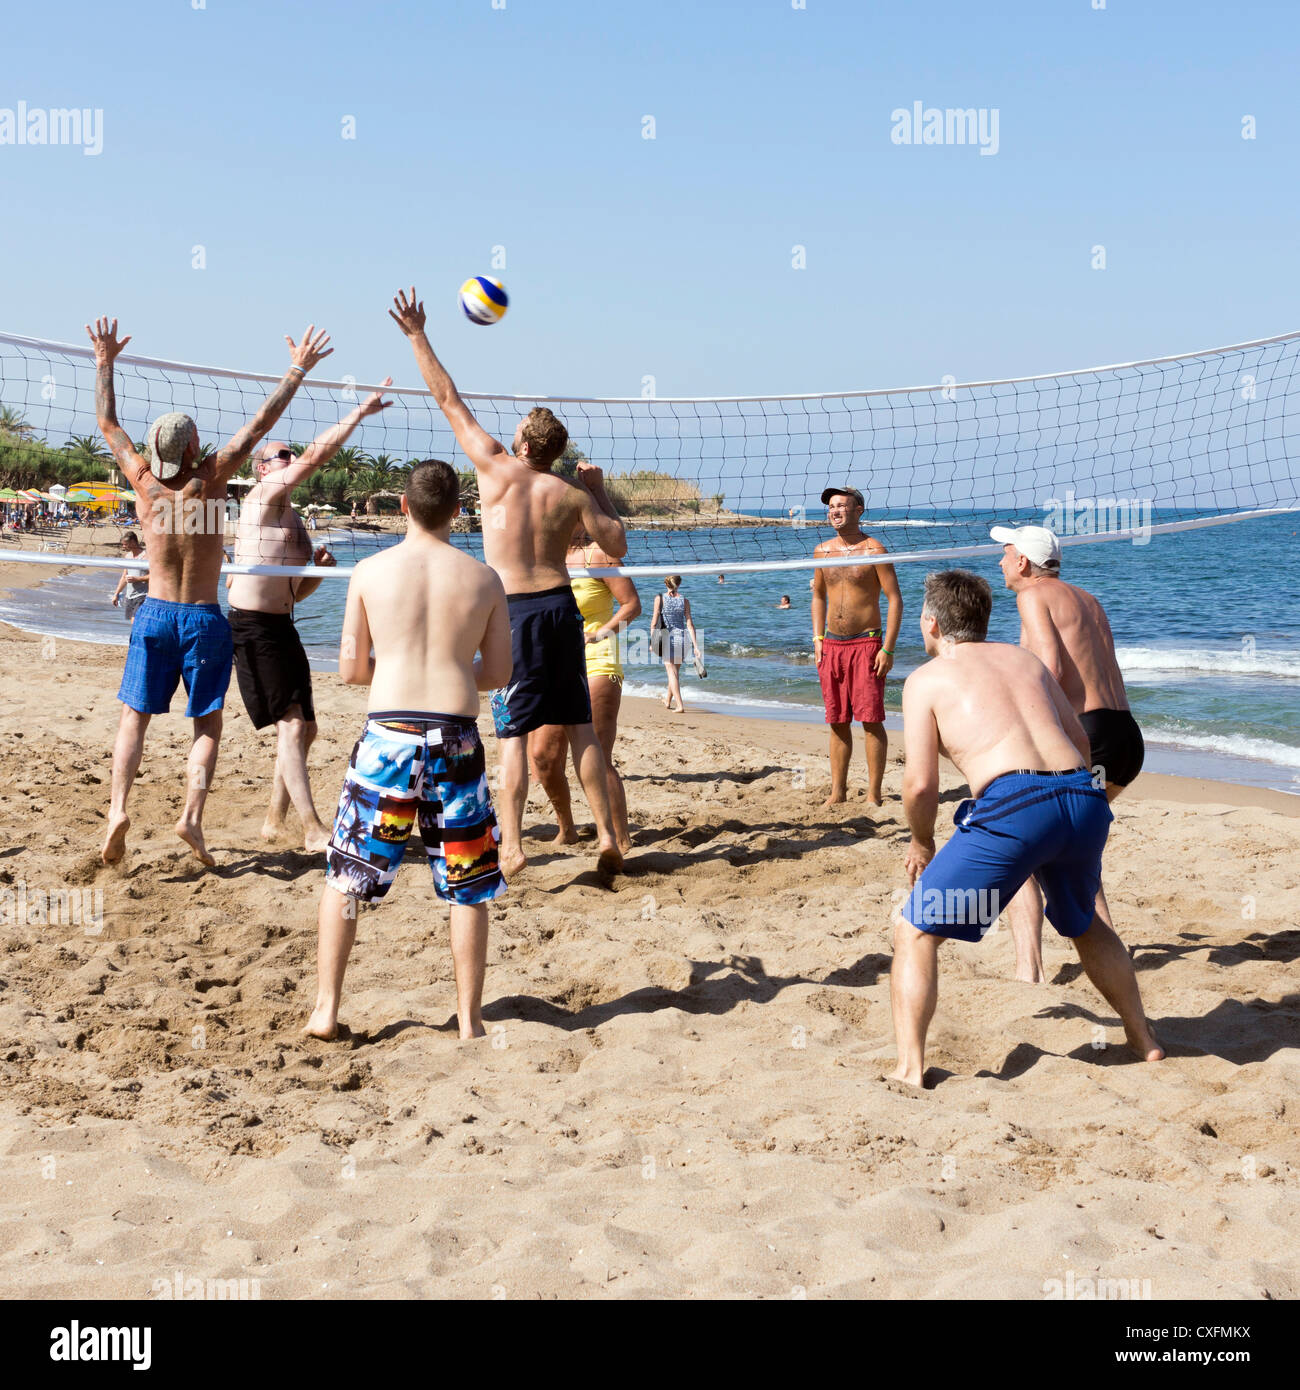 A mixed sex game of beach, or sand, volley ball, Crete Greece Stock Photo